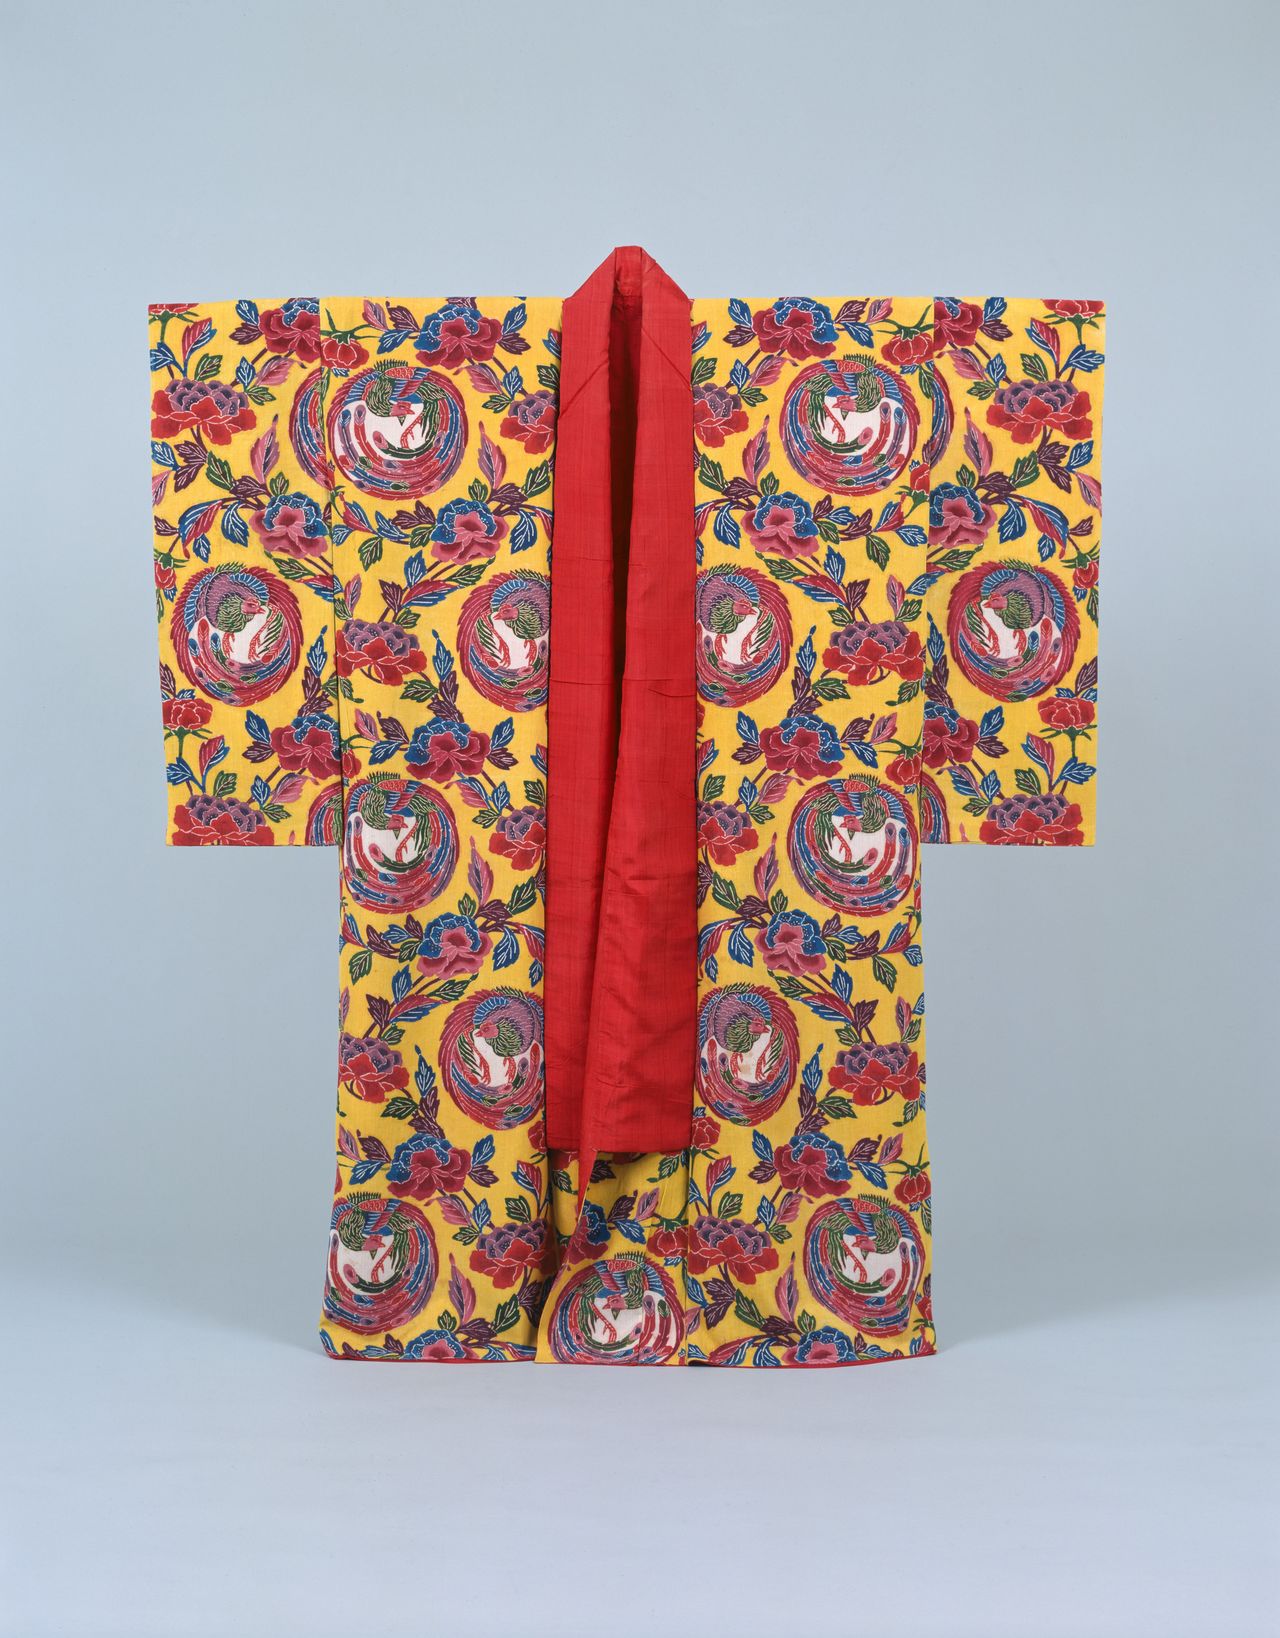 Lined silk crepe bingata kimono with phoenix and peony design on a yellow background. This would have been worn by boys of the ruling class before their coming-of-age ceremony. The vibrant yellow was achieved using orpiment, a toxic sulfide mineral used as a dye. (In the collection of the Naha City Historical Museum).